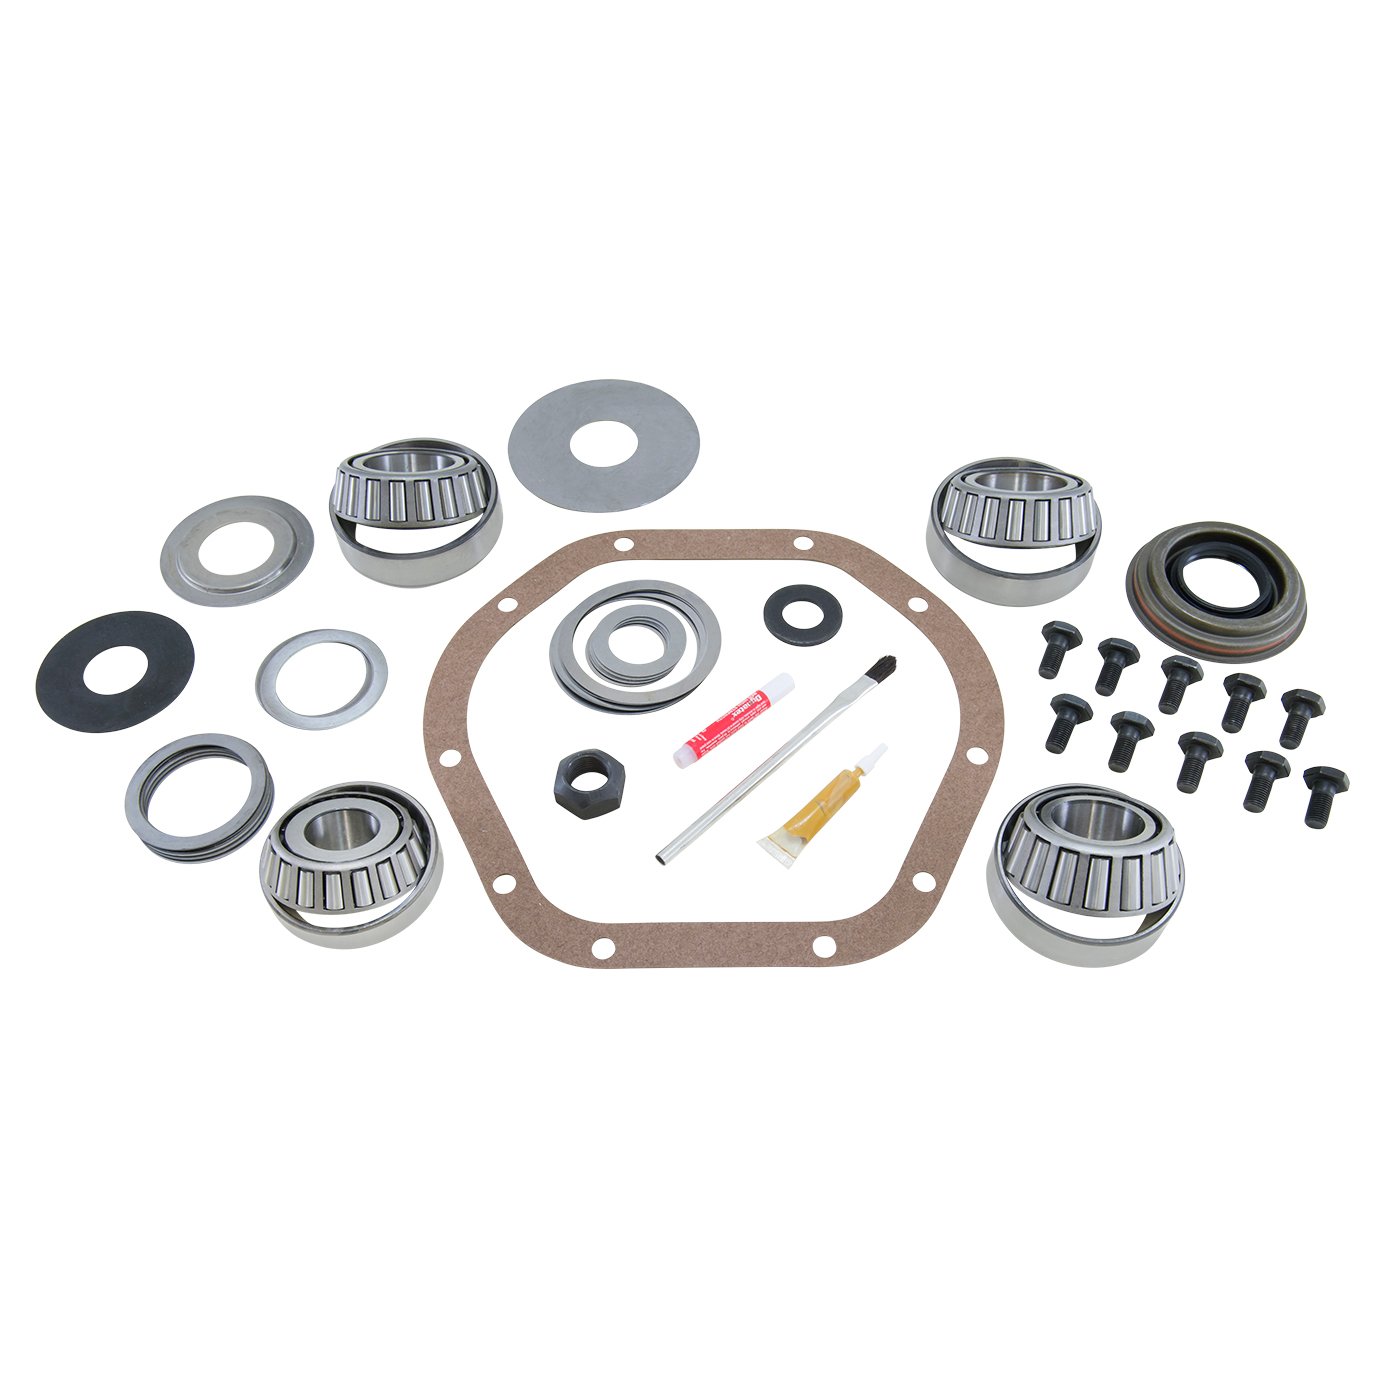 USA Standard ZK D44-19 Master Overhaul Kit, For The Dana 44 Differential With 19 Spline